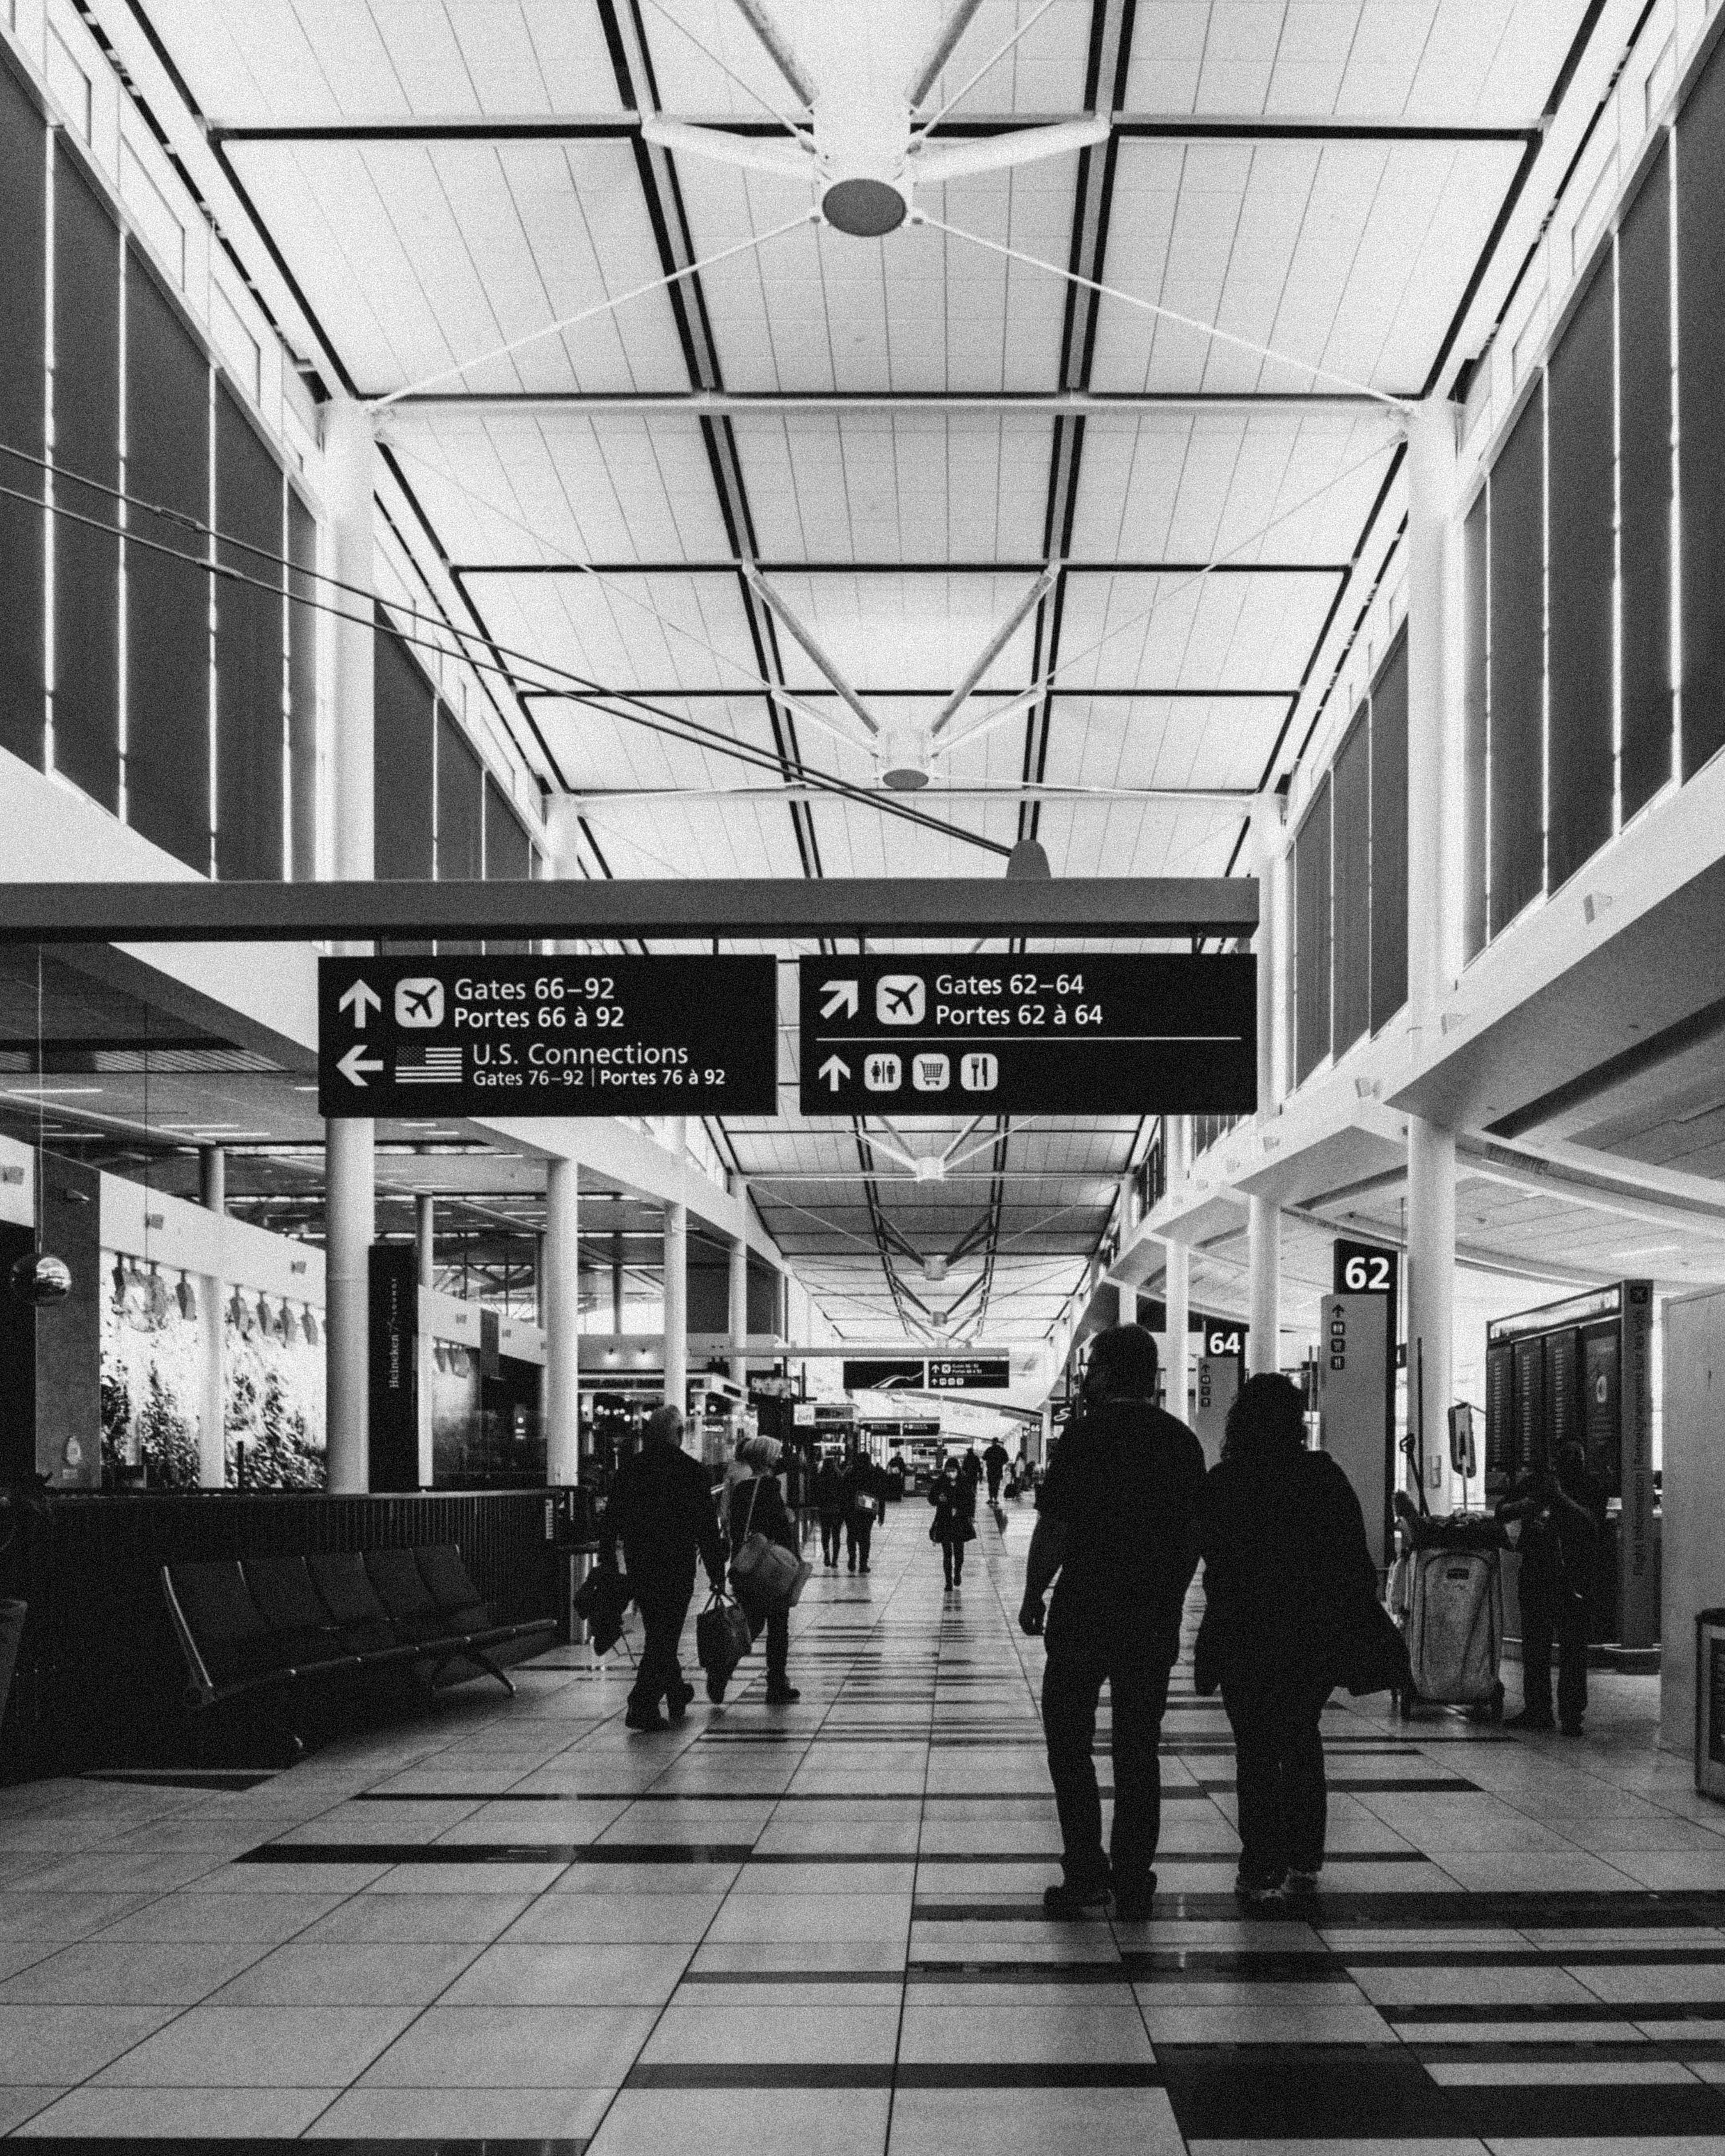 People walking through a busy airport terminal with luggage and signs overhead